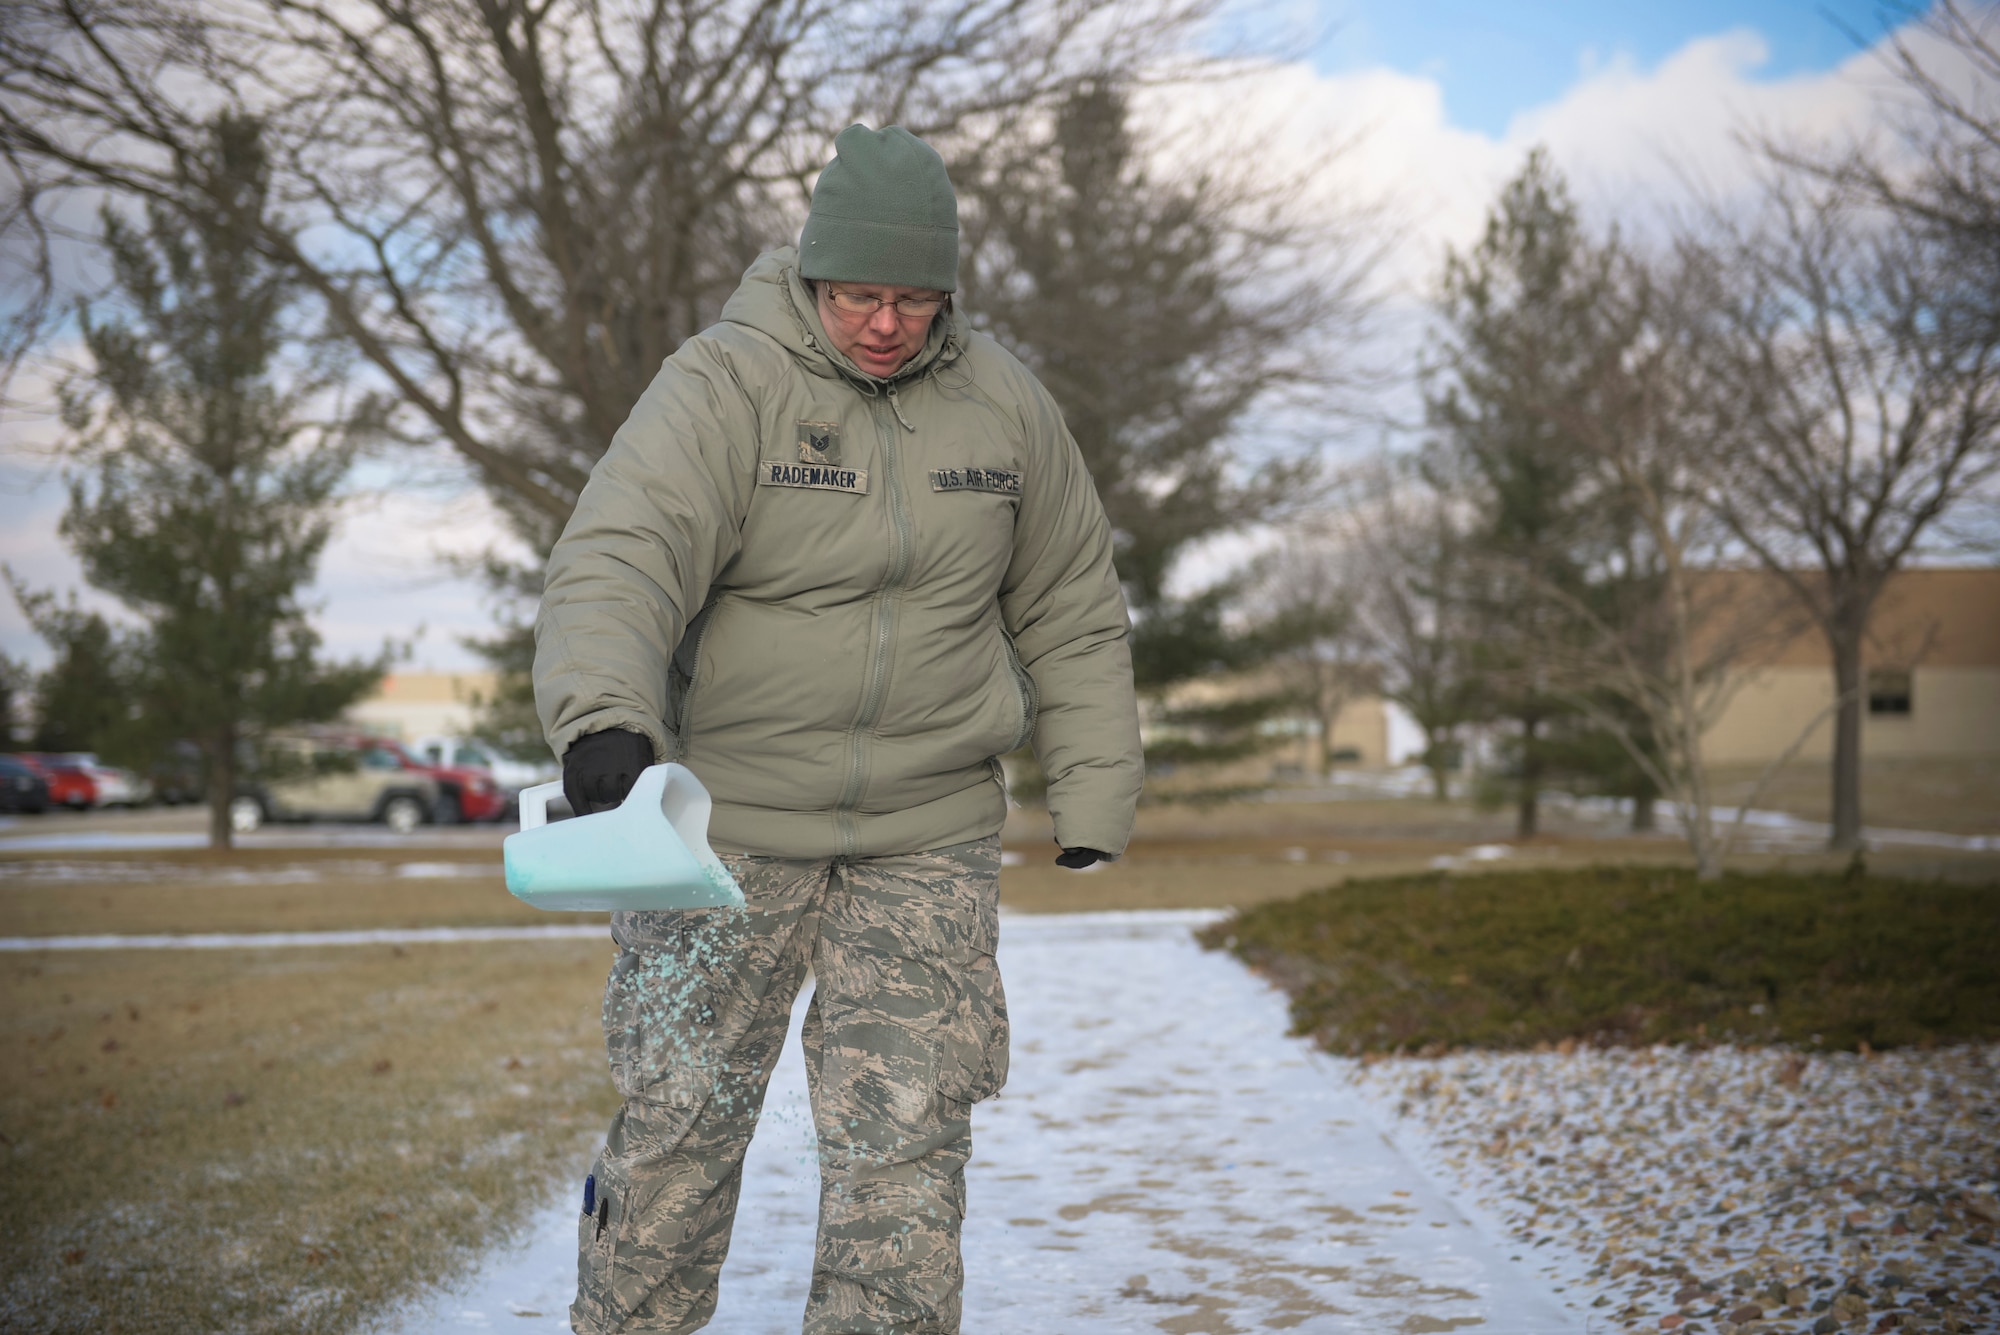 U.S. Air Force Tech. Sgt. Dawn Rademaker, a broadcast journalist craftsman with the 182nd Airlift Wing, Illinois Air National Guard, applies ice melt salt to the sidewalk in Peoria, Ill., Jan. 7, 2017. Wearing traction cleats over shoes and applying salt to sidewalks can help prevent slipping on ice, according the wing’s safety office. (U.S. Air National Guard photo by Airman 1st Class Jason Grabiec)